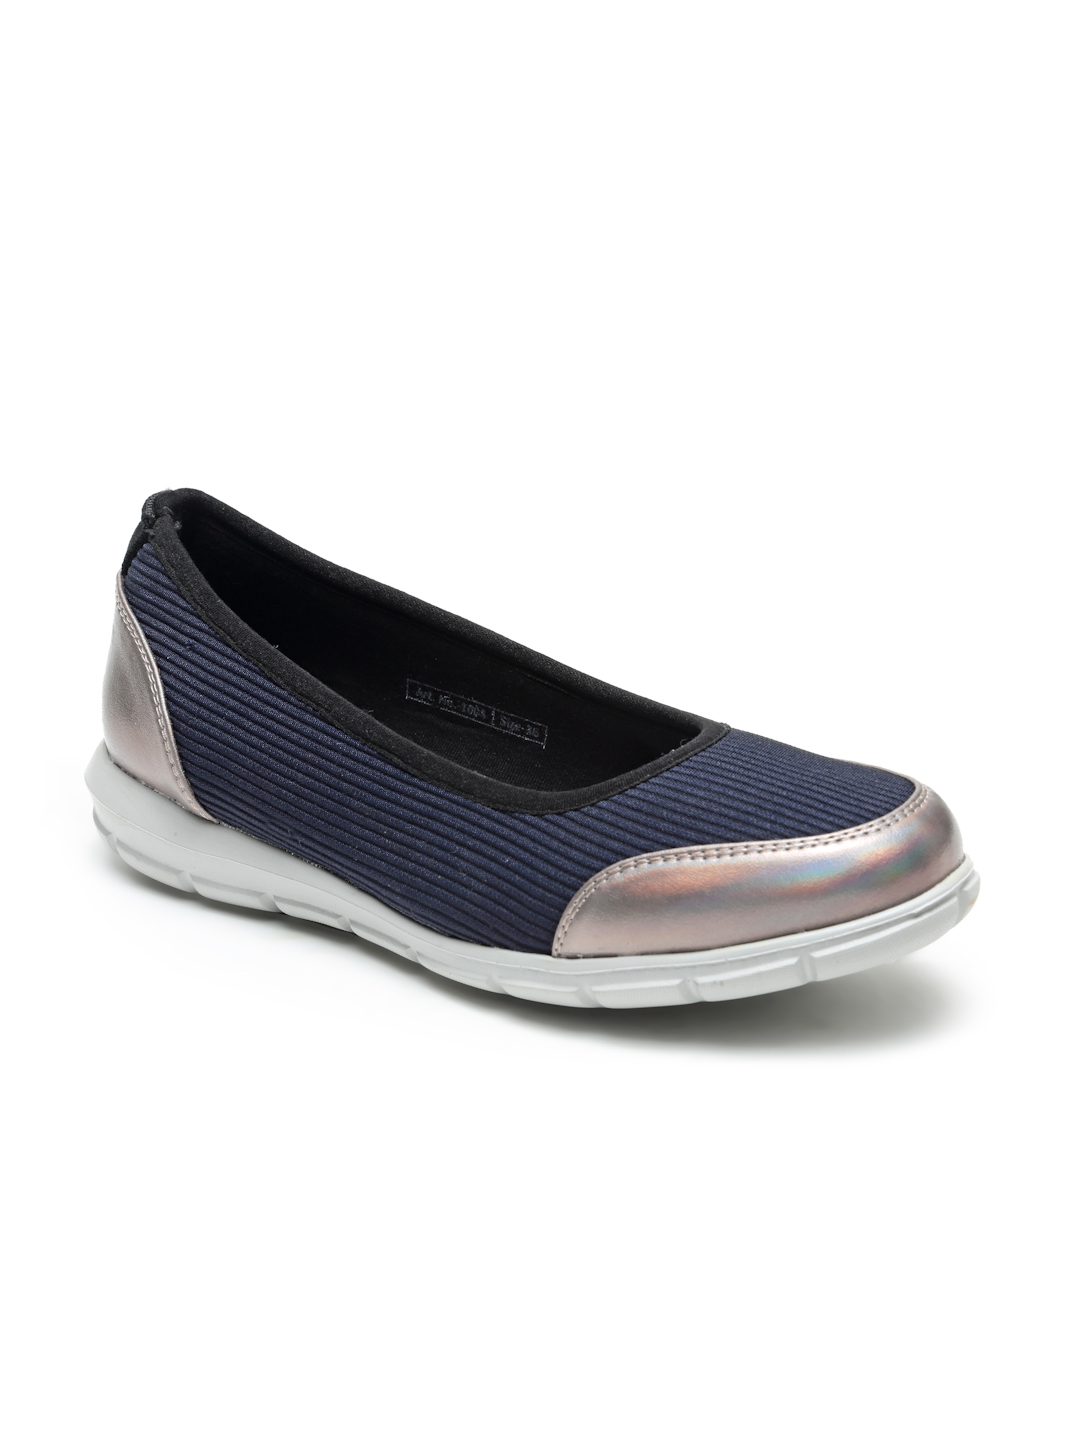 Buy Von Wellx Germany Comfort Women's Blue Casual Shoes Alice Online in Nagpur